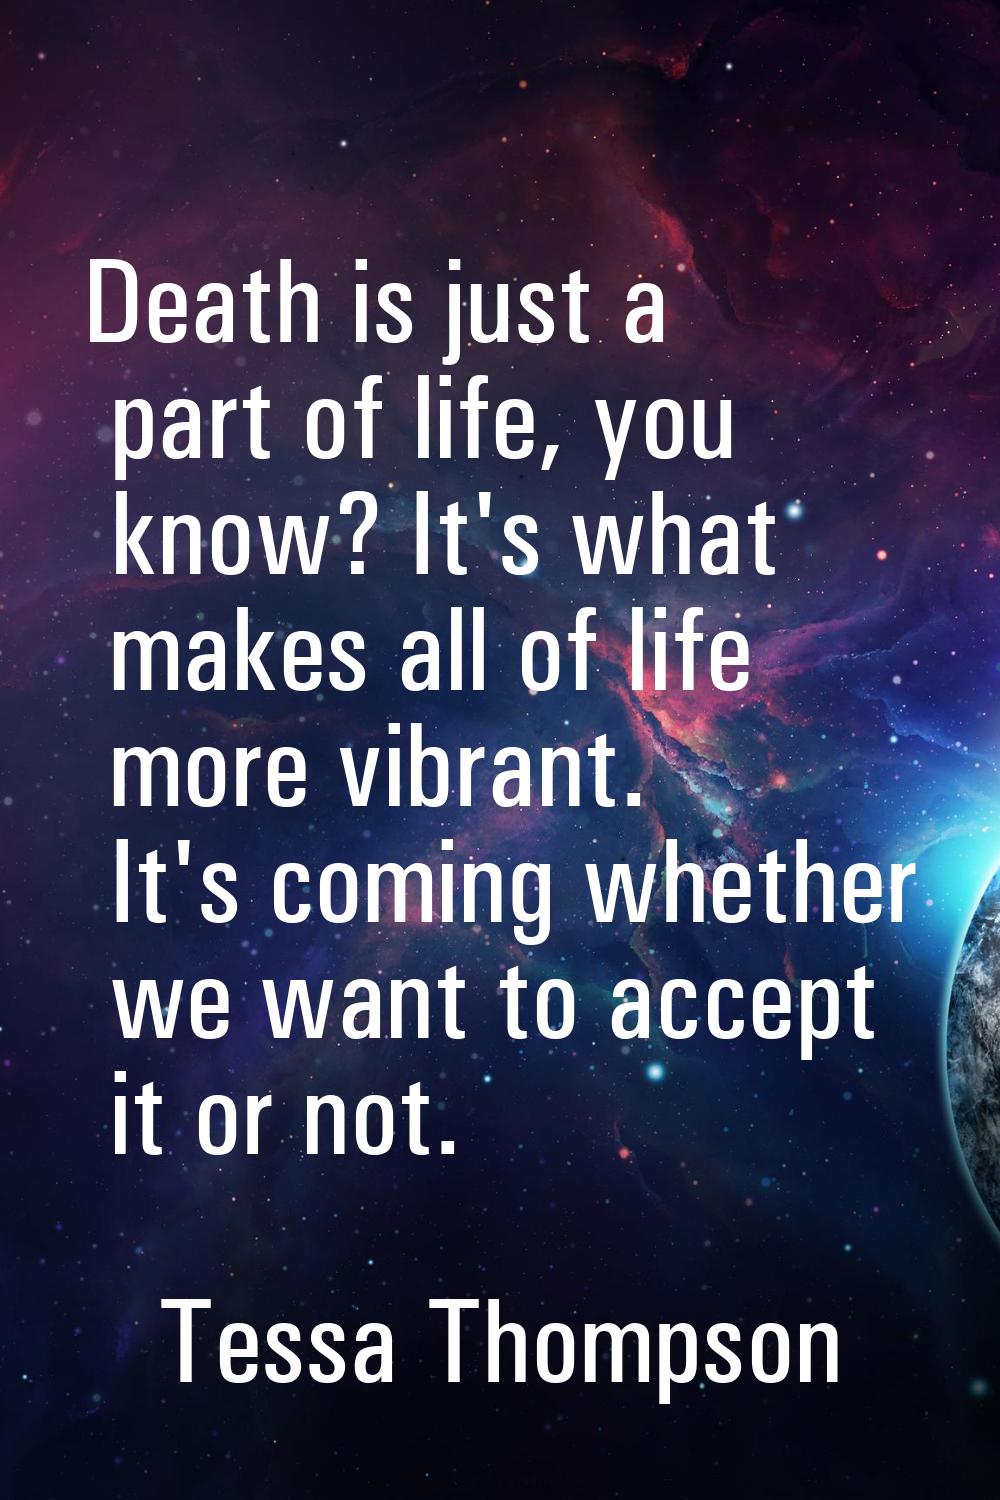 Death is just a part of life, you know? It's what makes all of life more vibrant. It's coming wheth